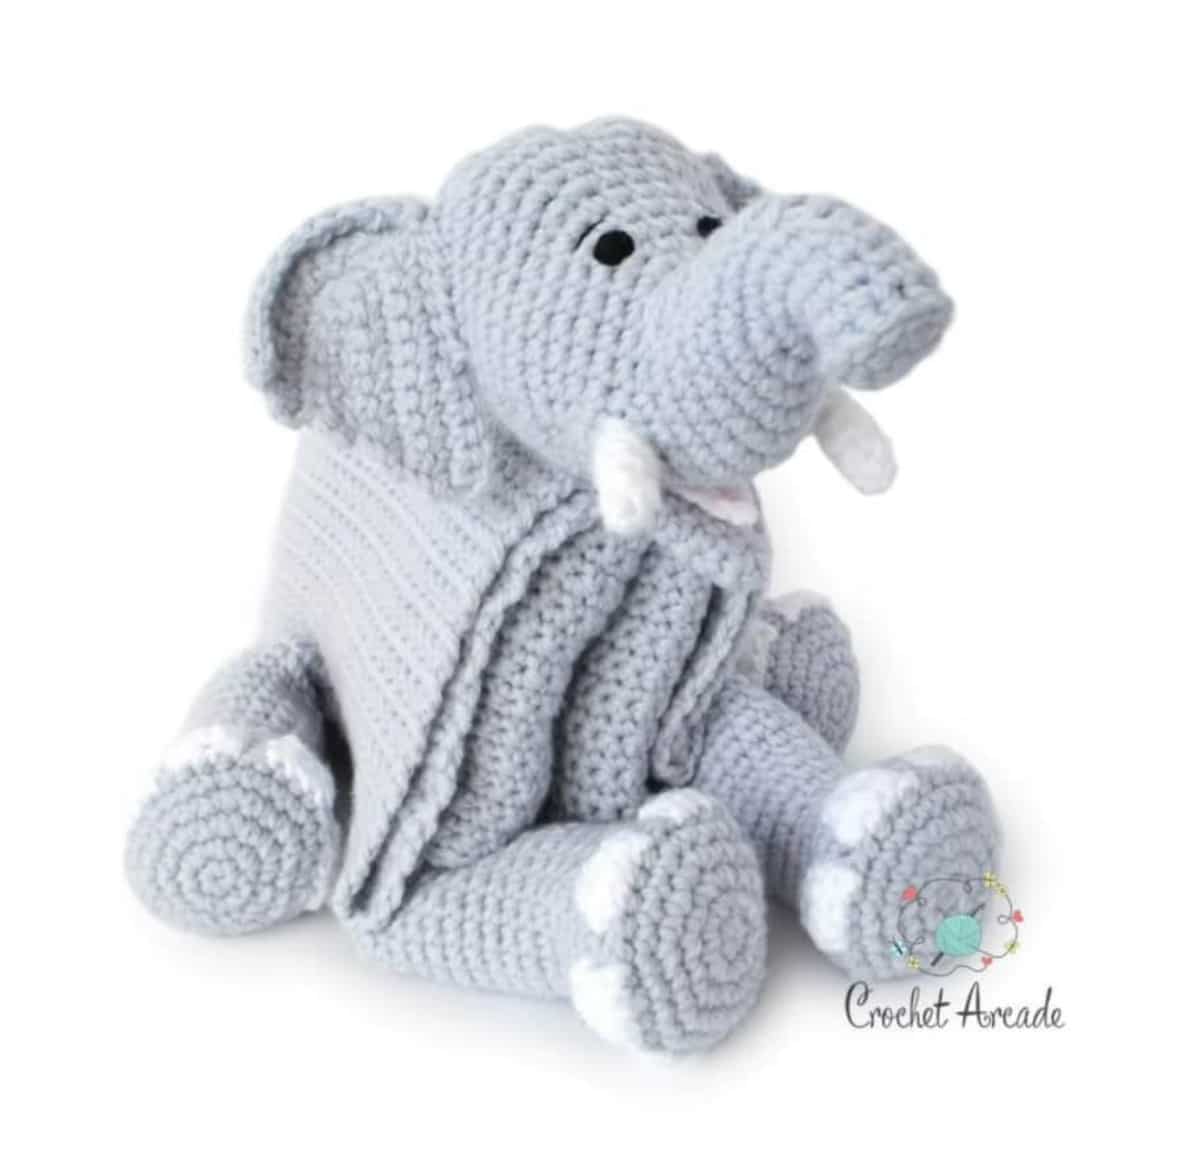 Large gray crochet blanket with a stuffed elephant head and legs attached to it. The elephant has small white tusks and white feet.